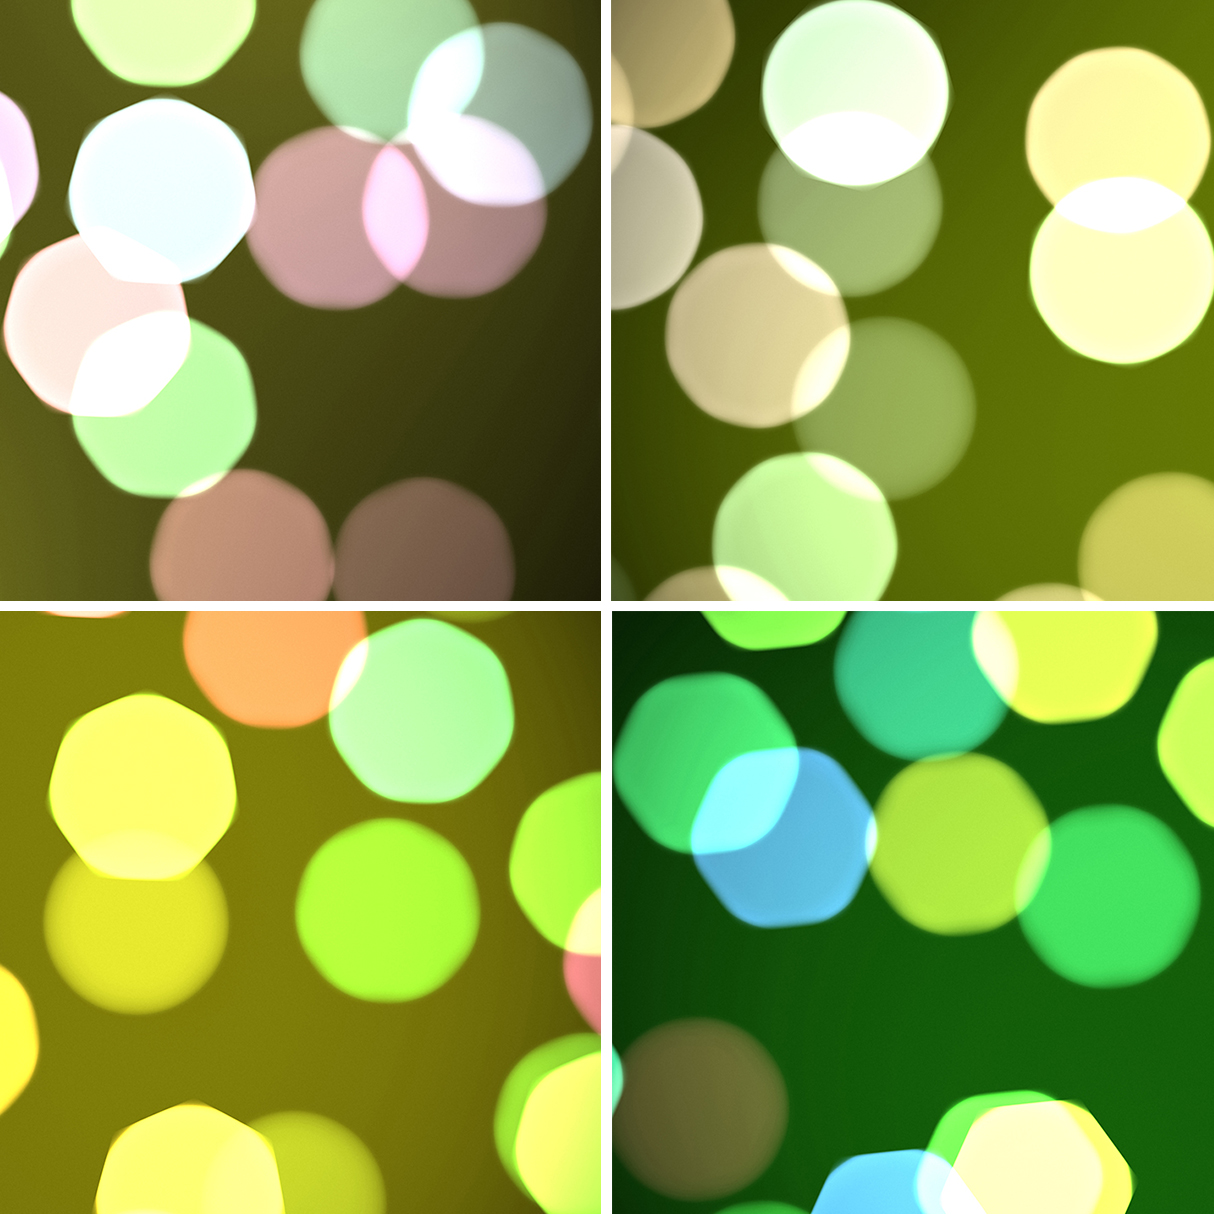 50 Bokeh Pro Backgrounds Samples Preview – Part 8